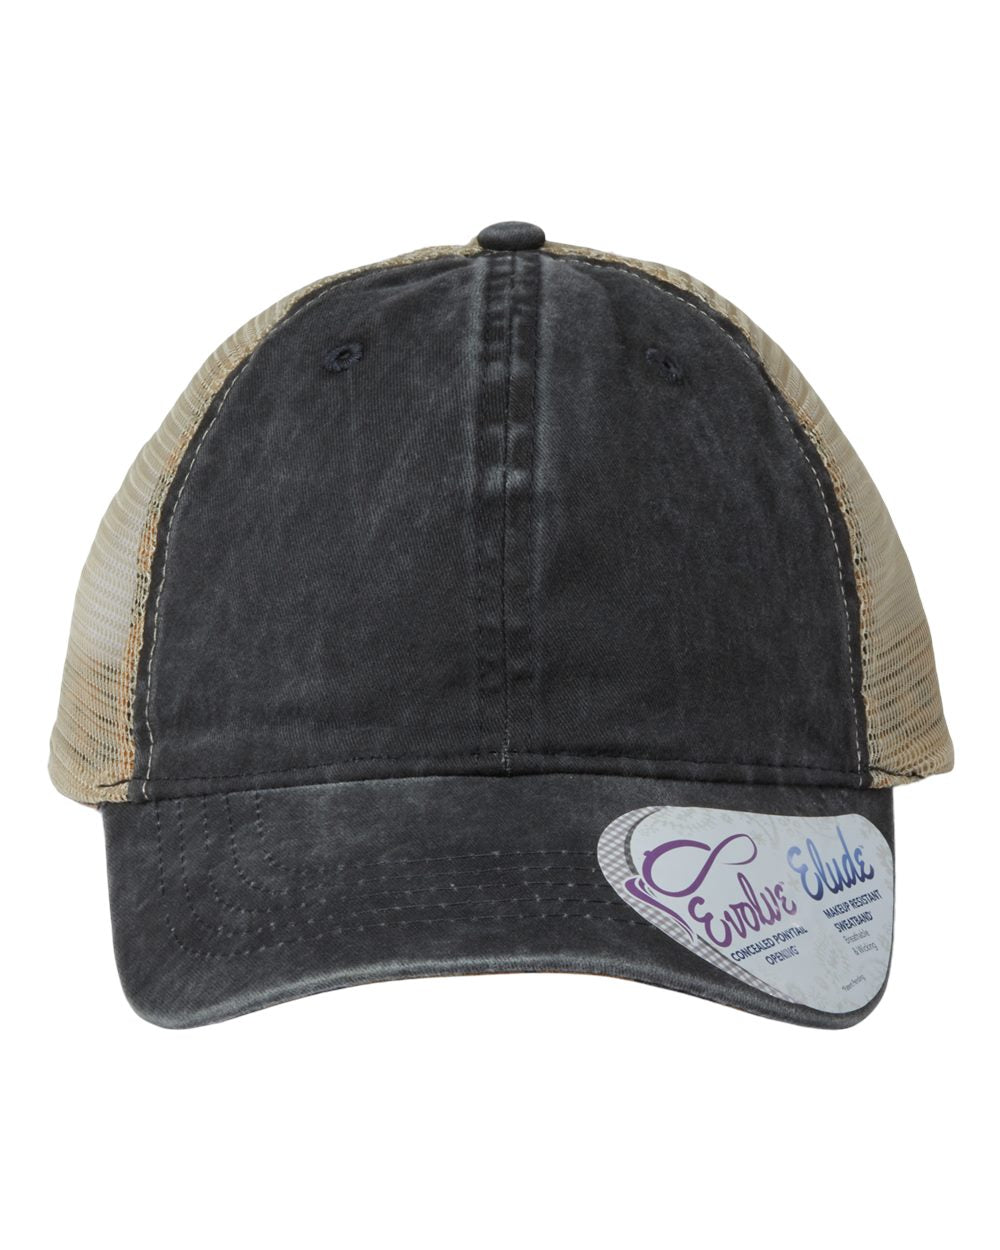 A women's washed mesh-back cap in black with leopard print on the front panel.